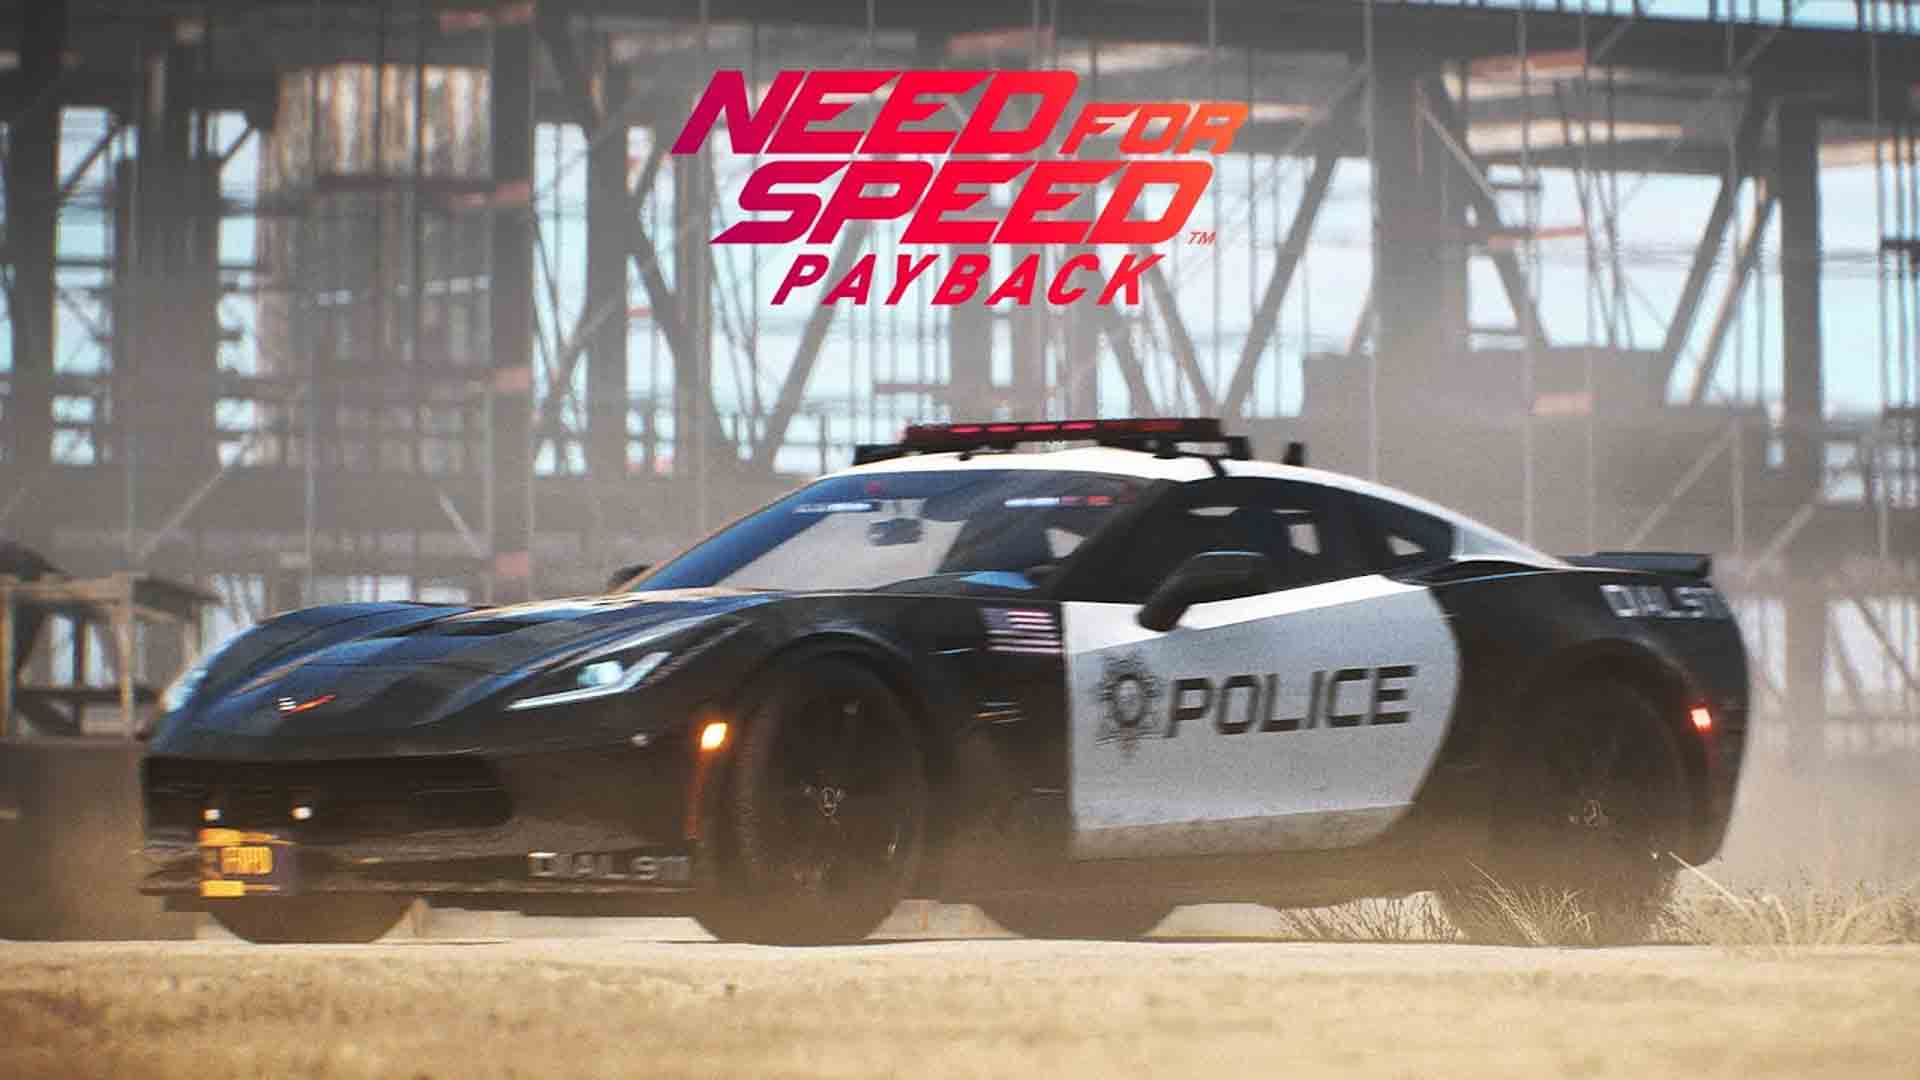 need for speed payback playstation 4